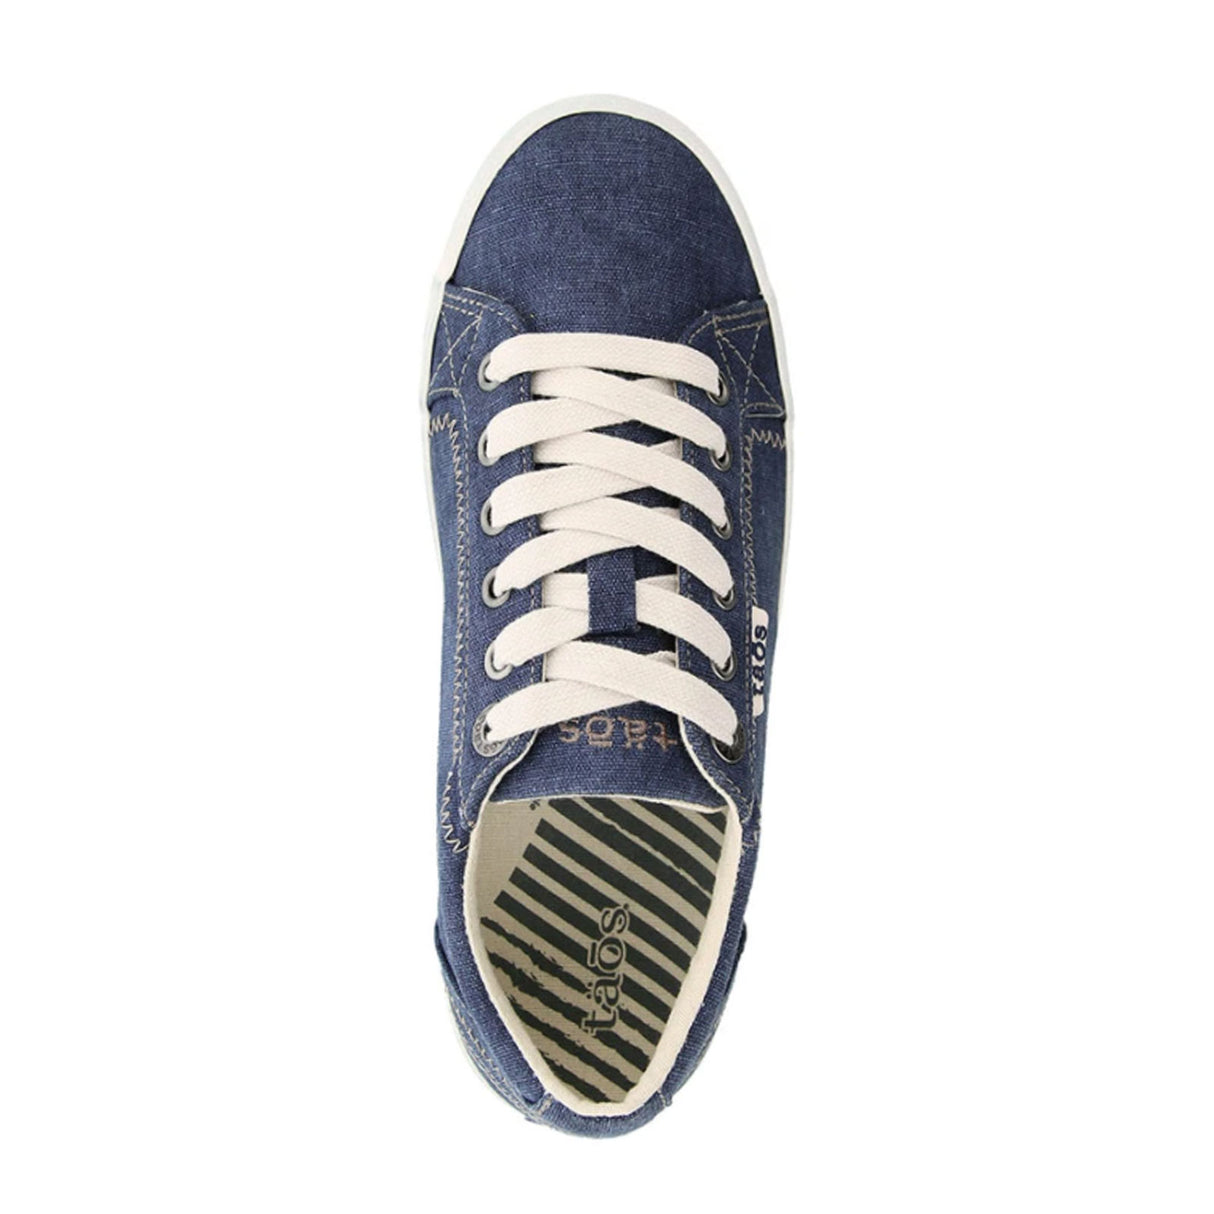 Taos Star Sneaker (Women) - Blue Wash Canvas Athletic - Casual - Lace Up - The Heel Shoe Fitters